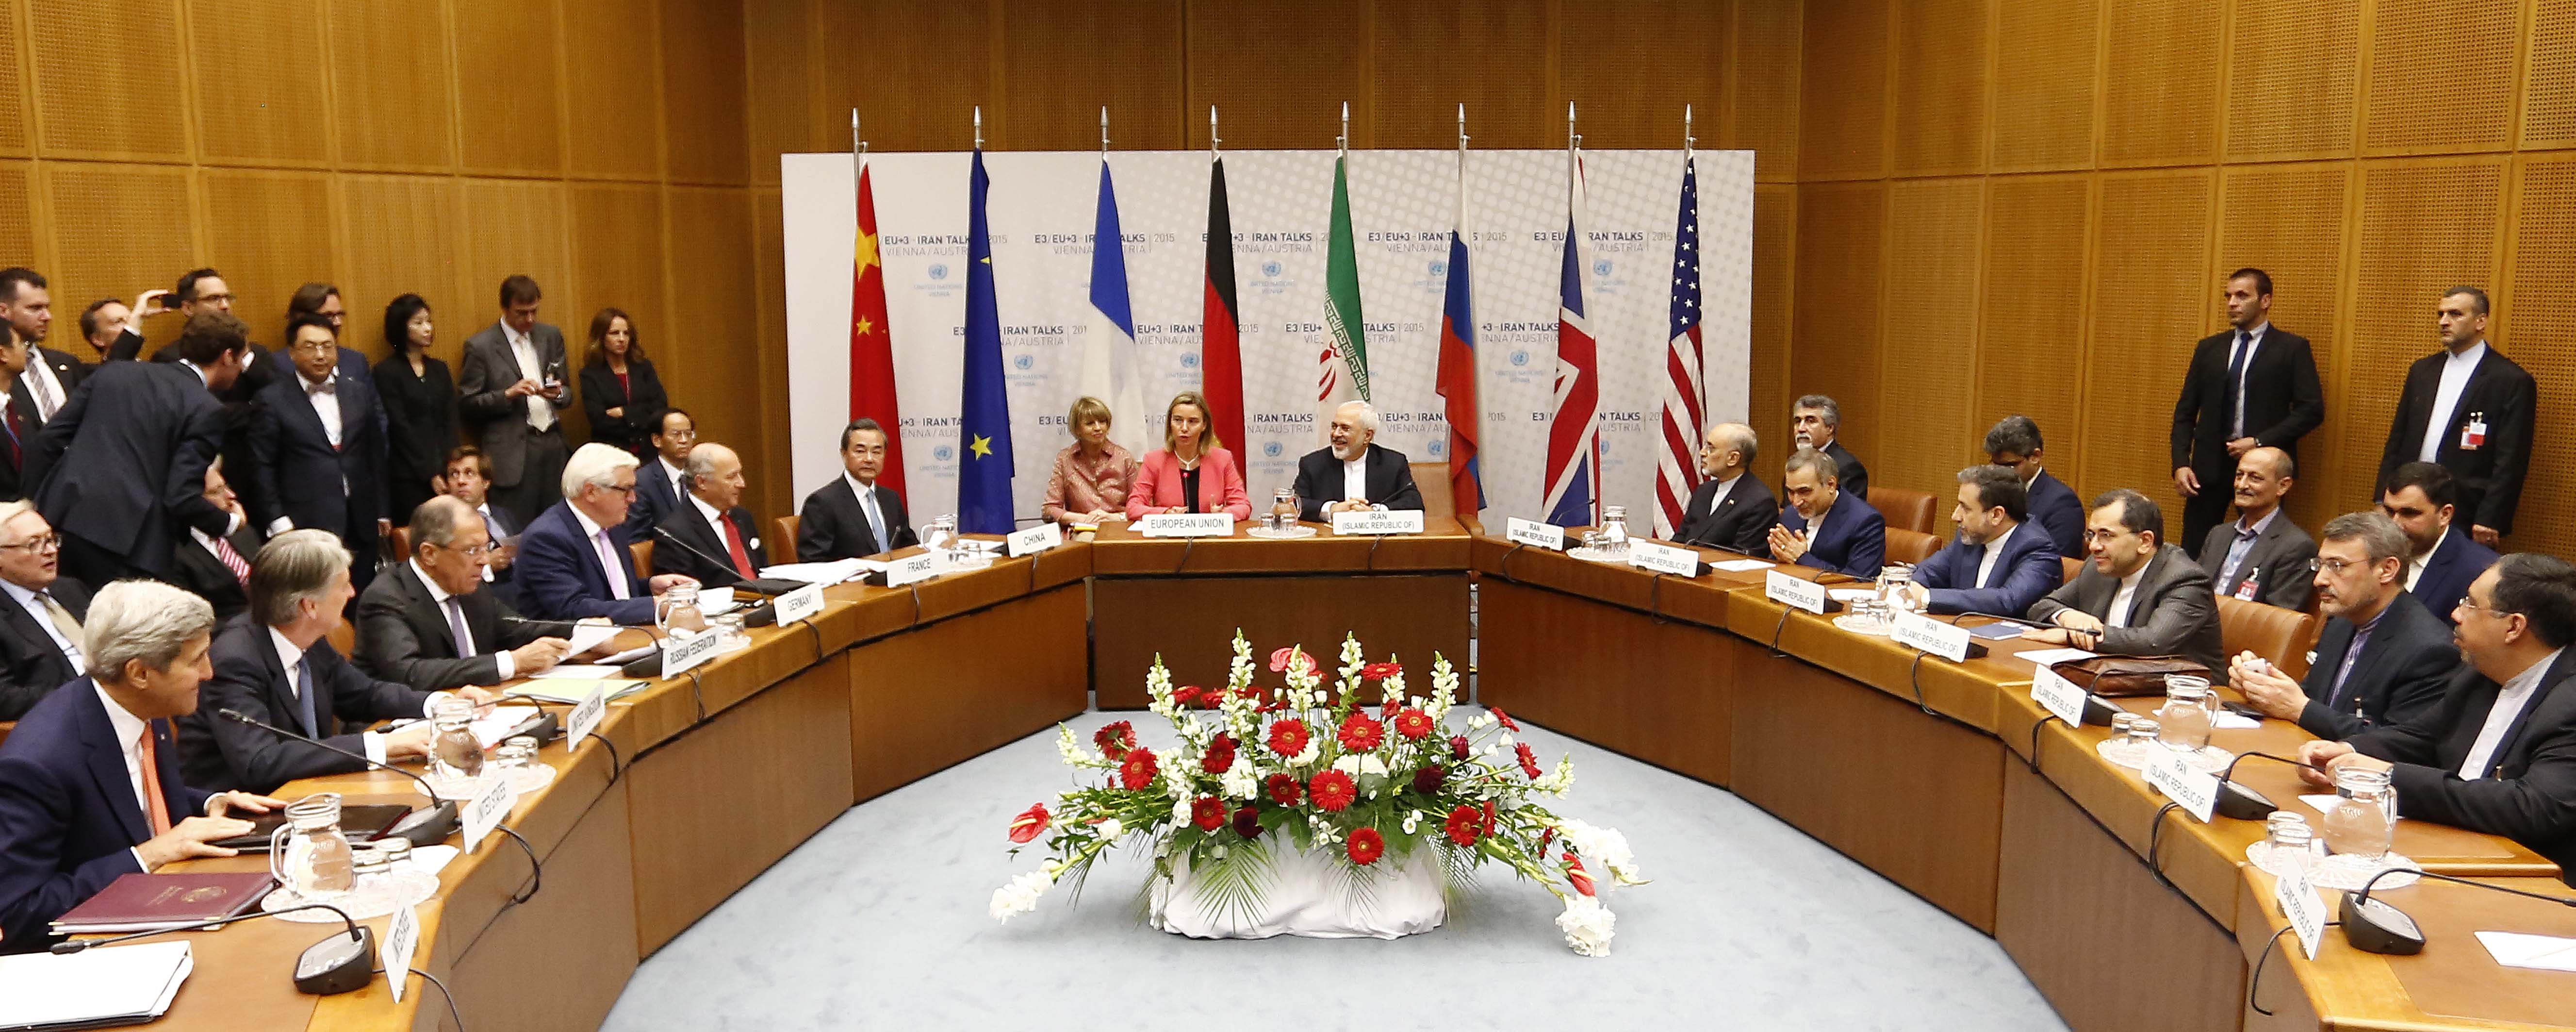 The Iran Nuclear Agreement: One Year Later